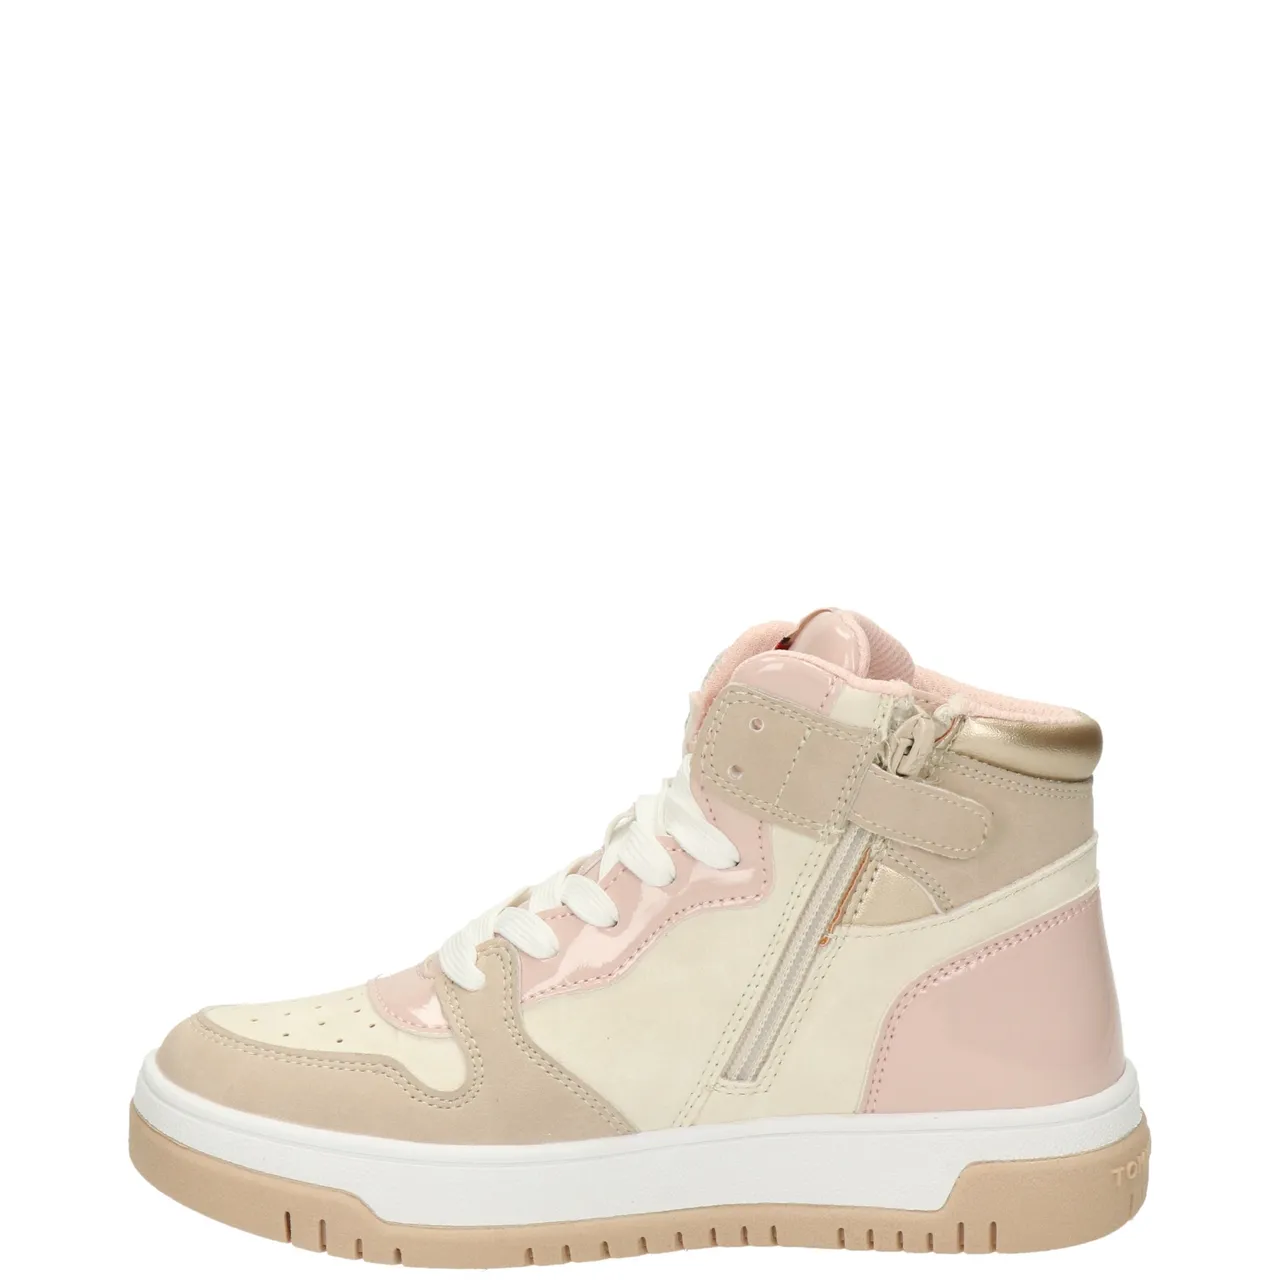 Tommy Hilfiger High-Top Lace Up hoge sneakers